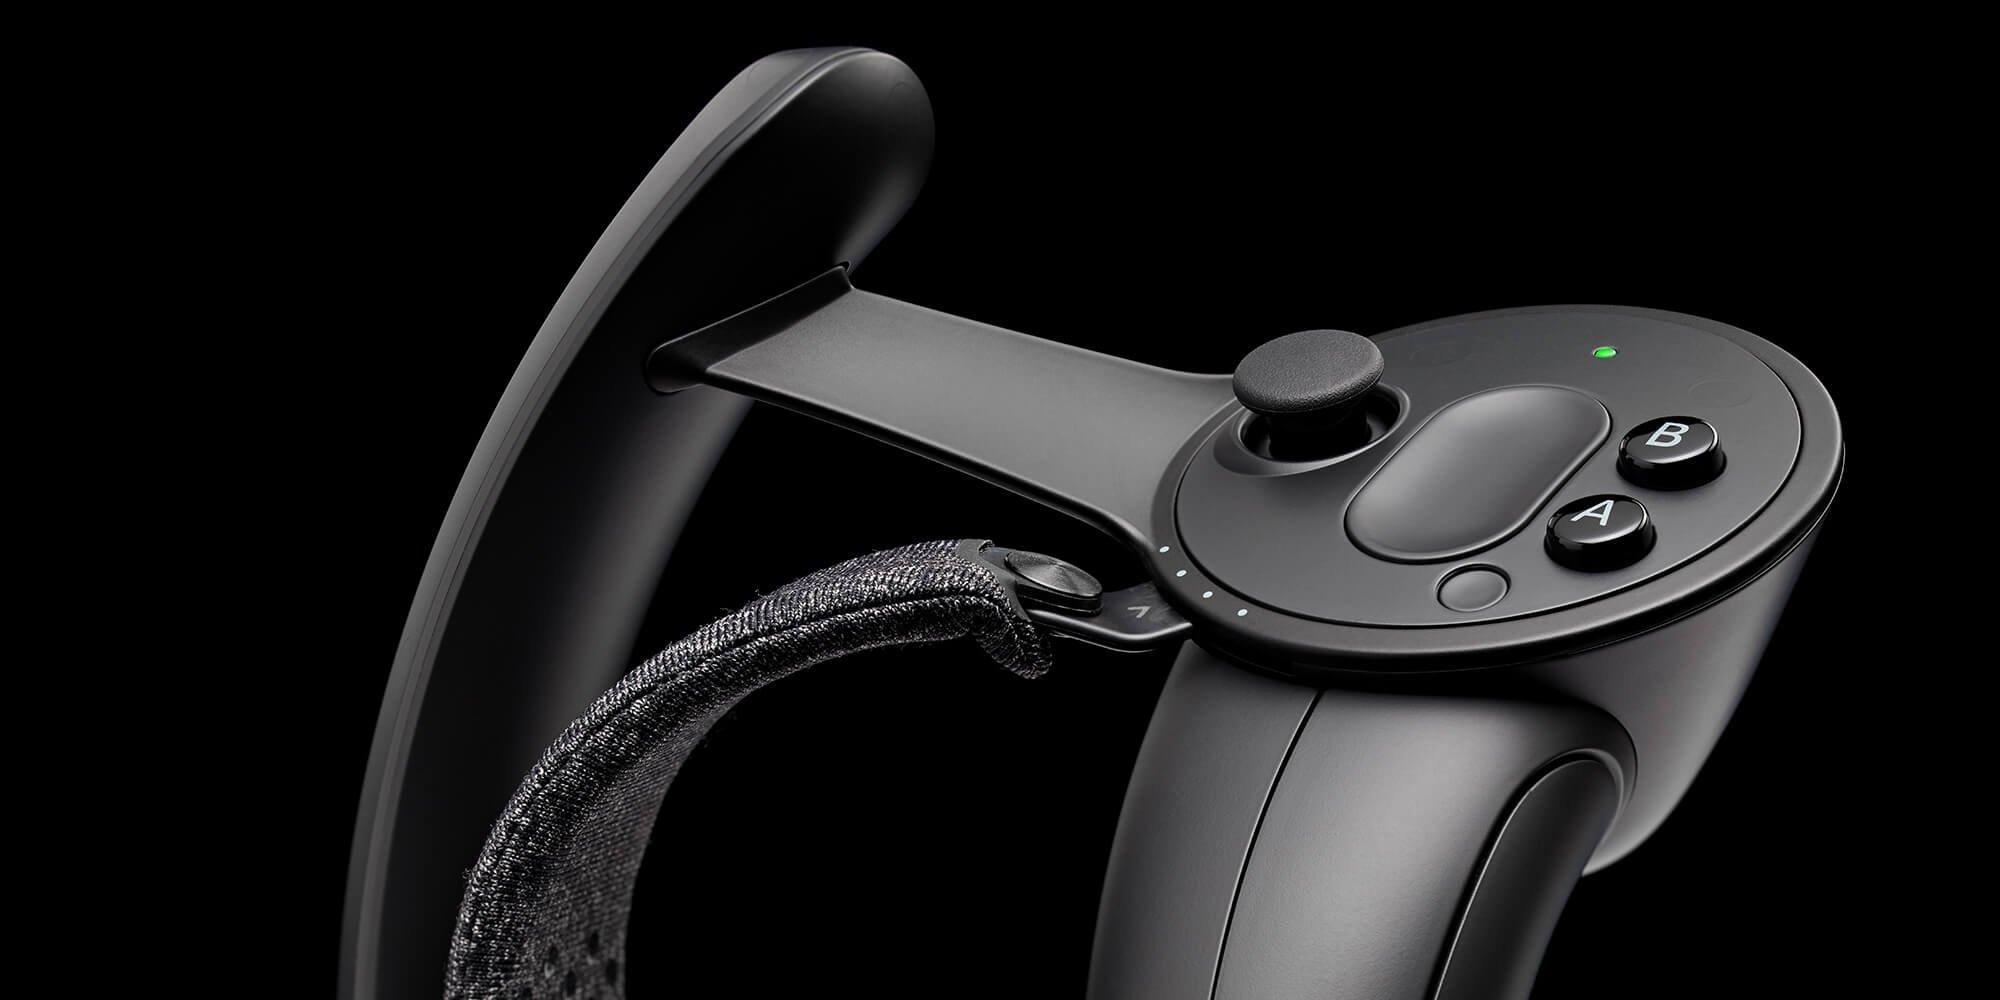 Valve Index® Replacement Right Controller on Steam